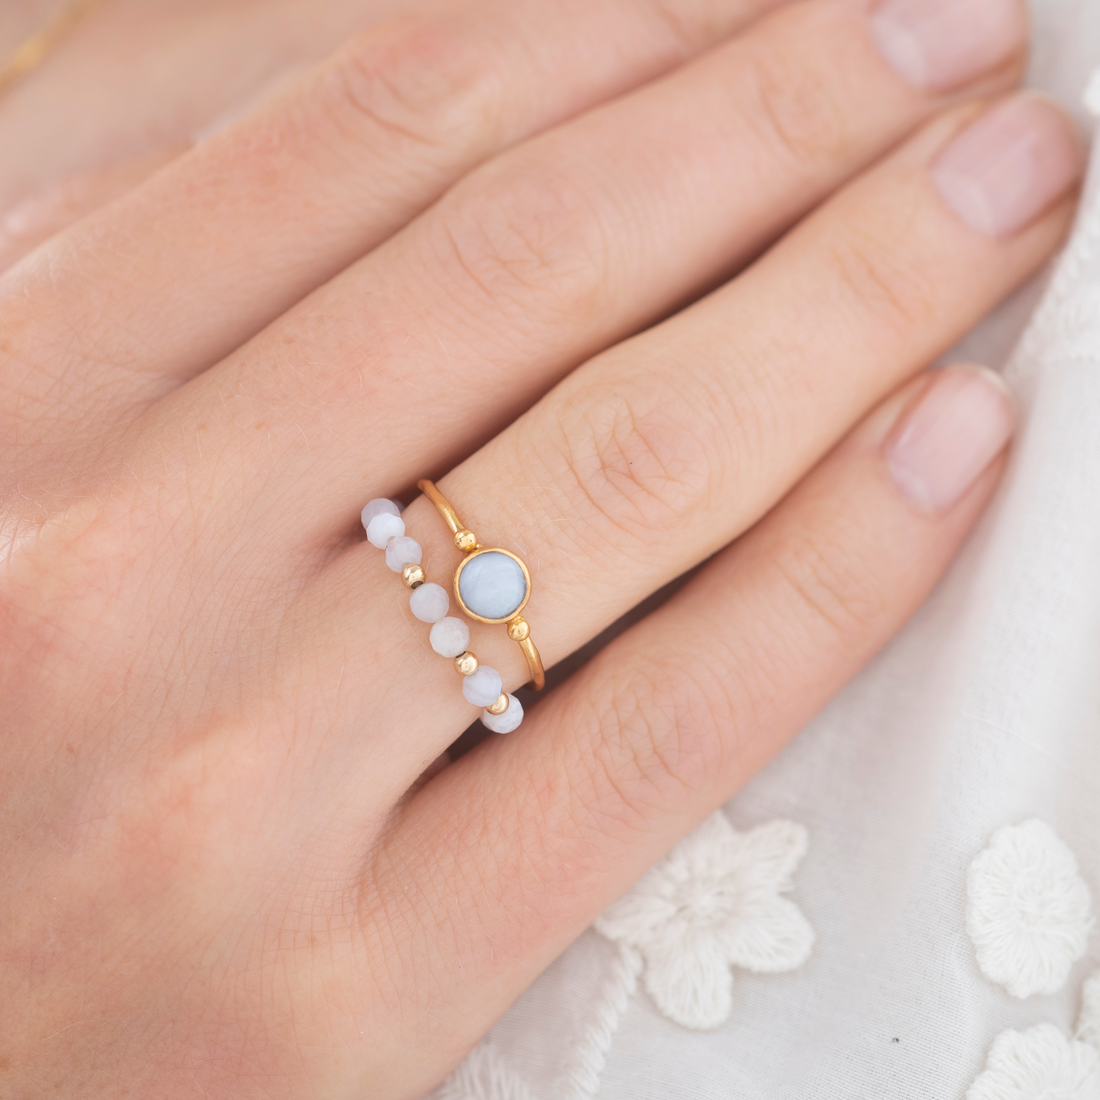 DEDICATED BLUE LACE AGATE RING